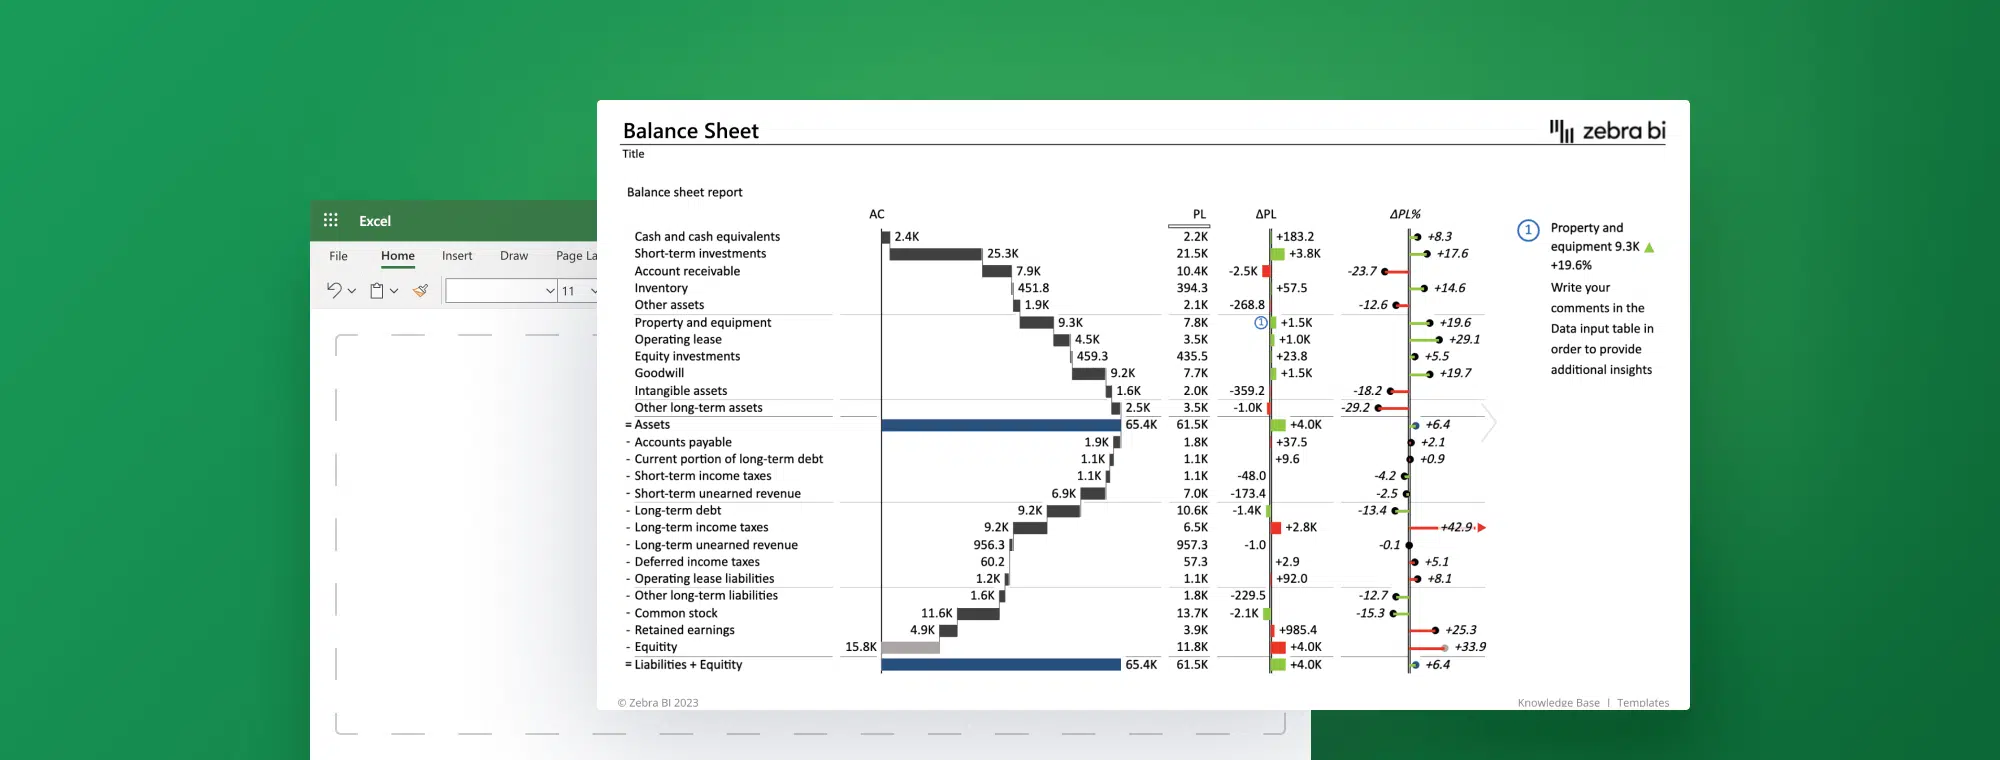 presentation of financial statements ppt